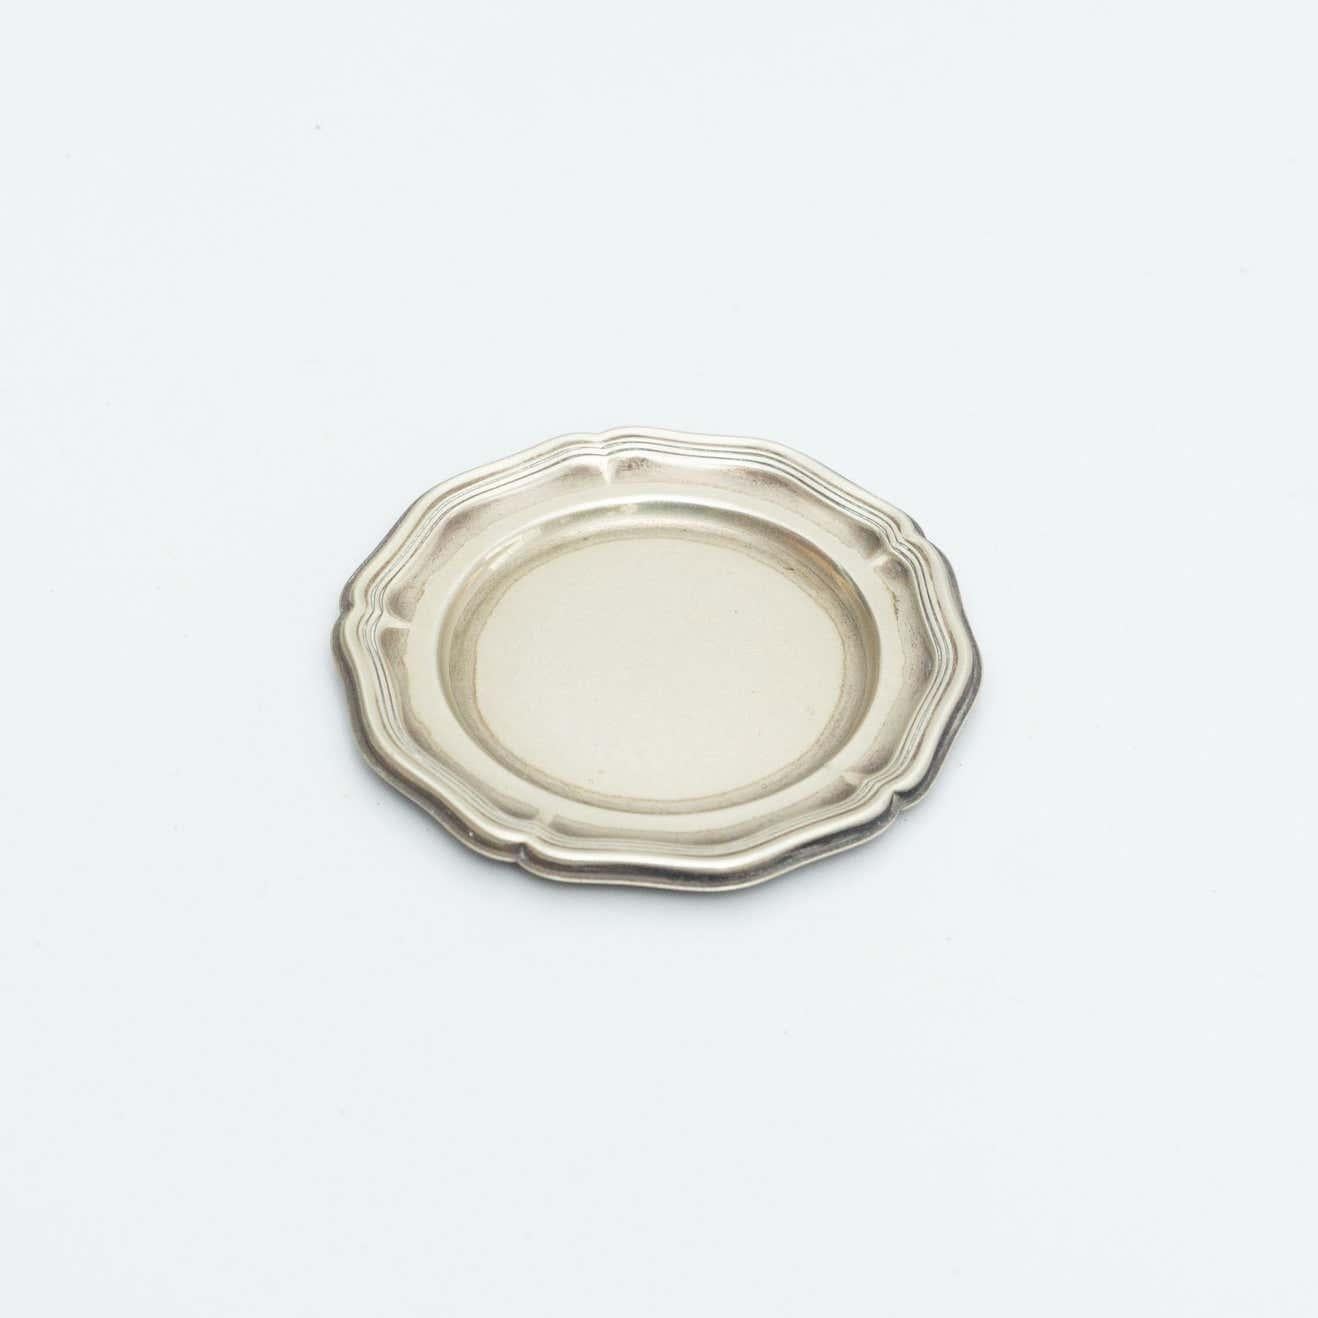 Metal ashtray by unknown manufactured from France, circa early 20th century.

In original condition, with minor wear consistent with age and use, preserving a beautiful patina.

Material:
Metal

Dimensions:
Ø 12 cm x H 0.7 cm.